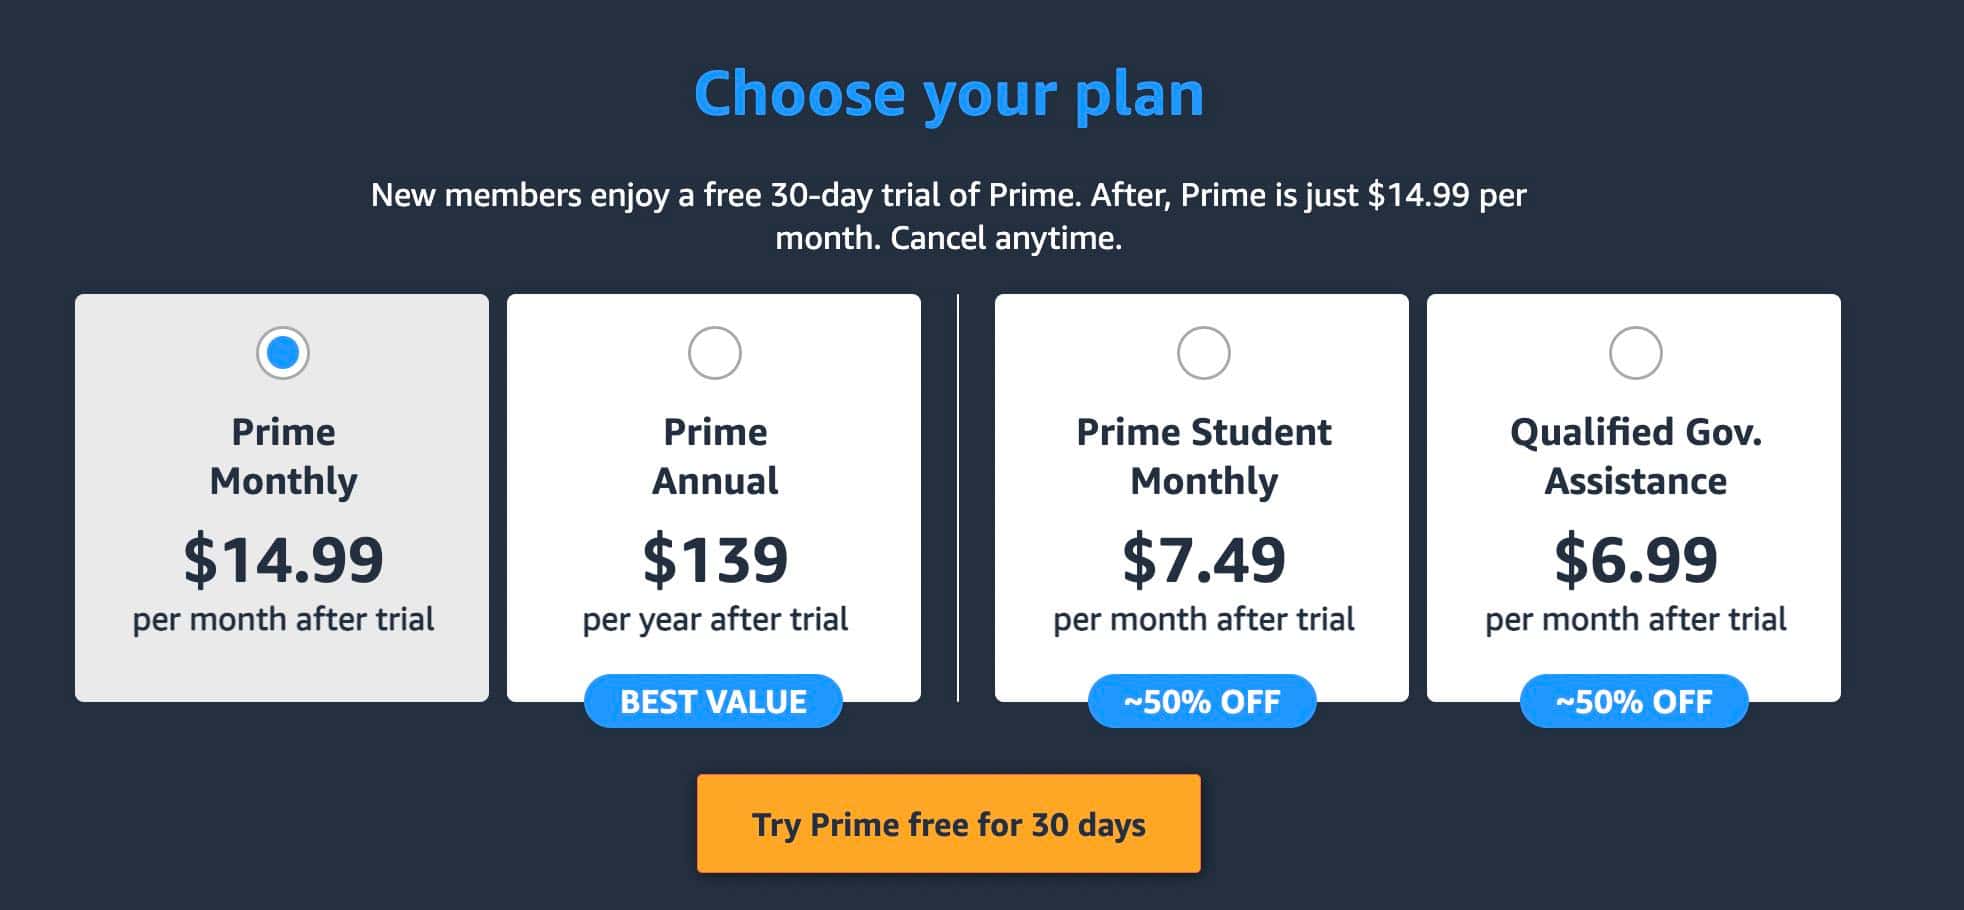 How to price a SaaS product, Amazon Prime pricing plans with free trial.